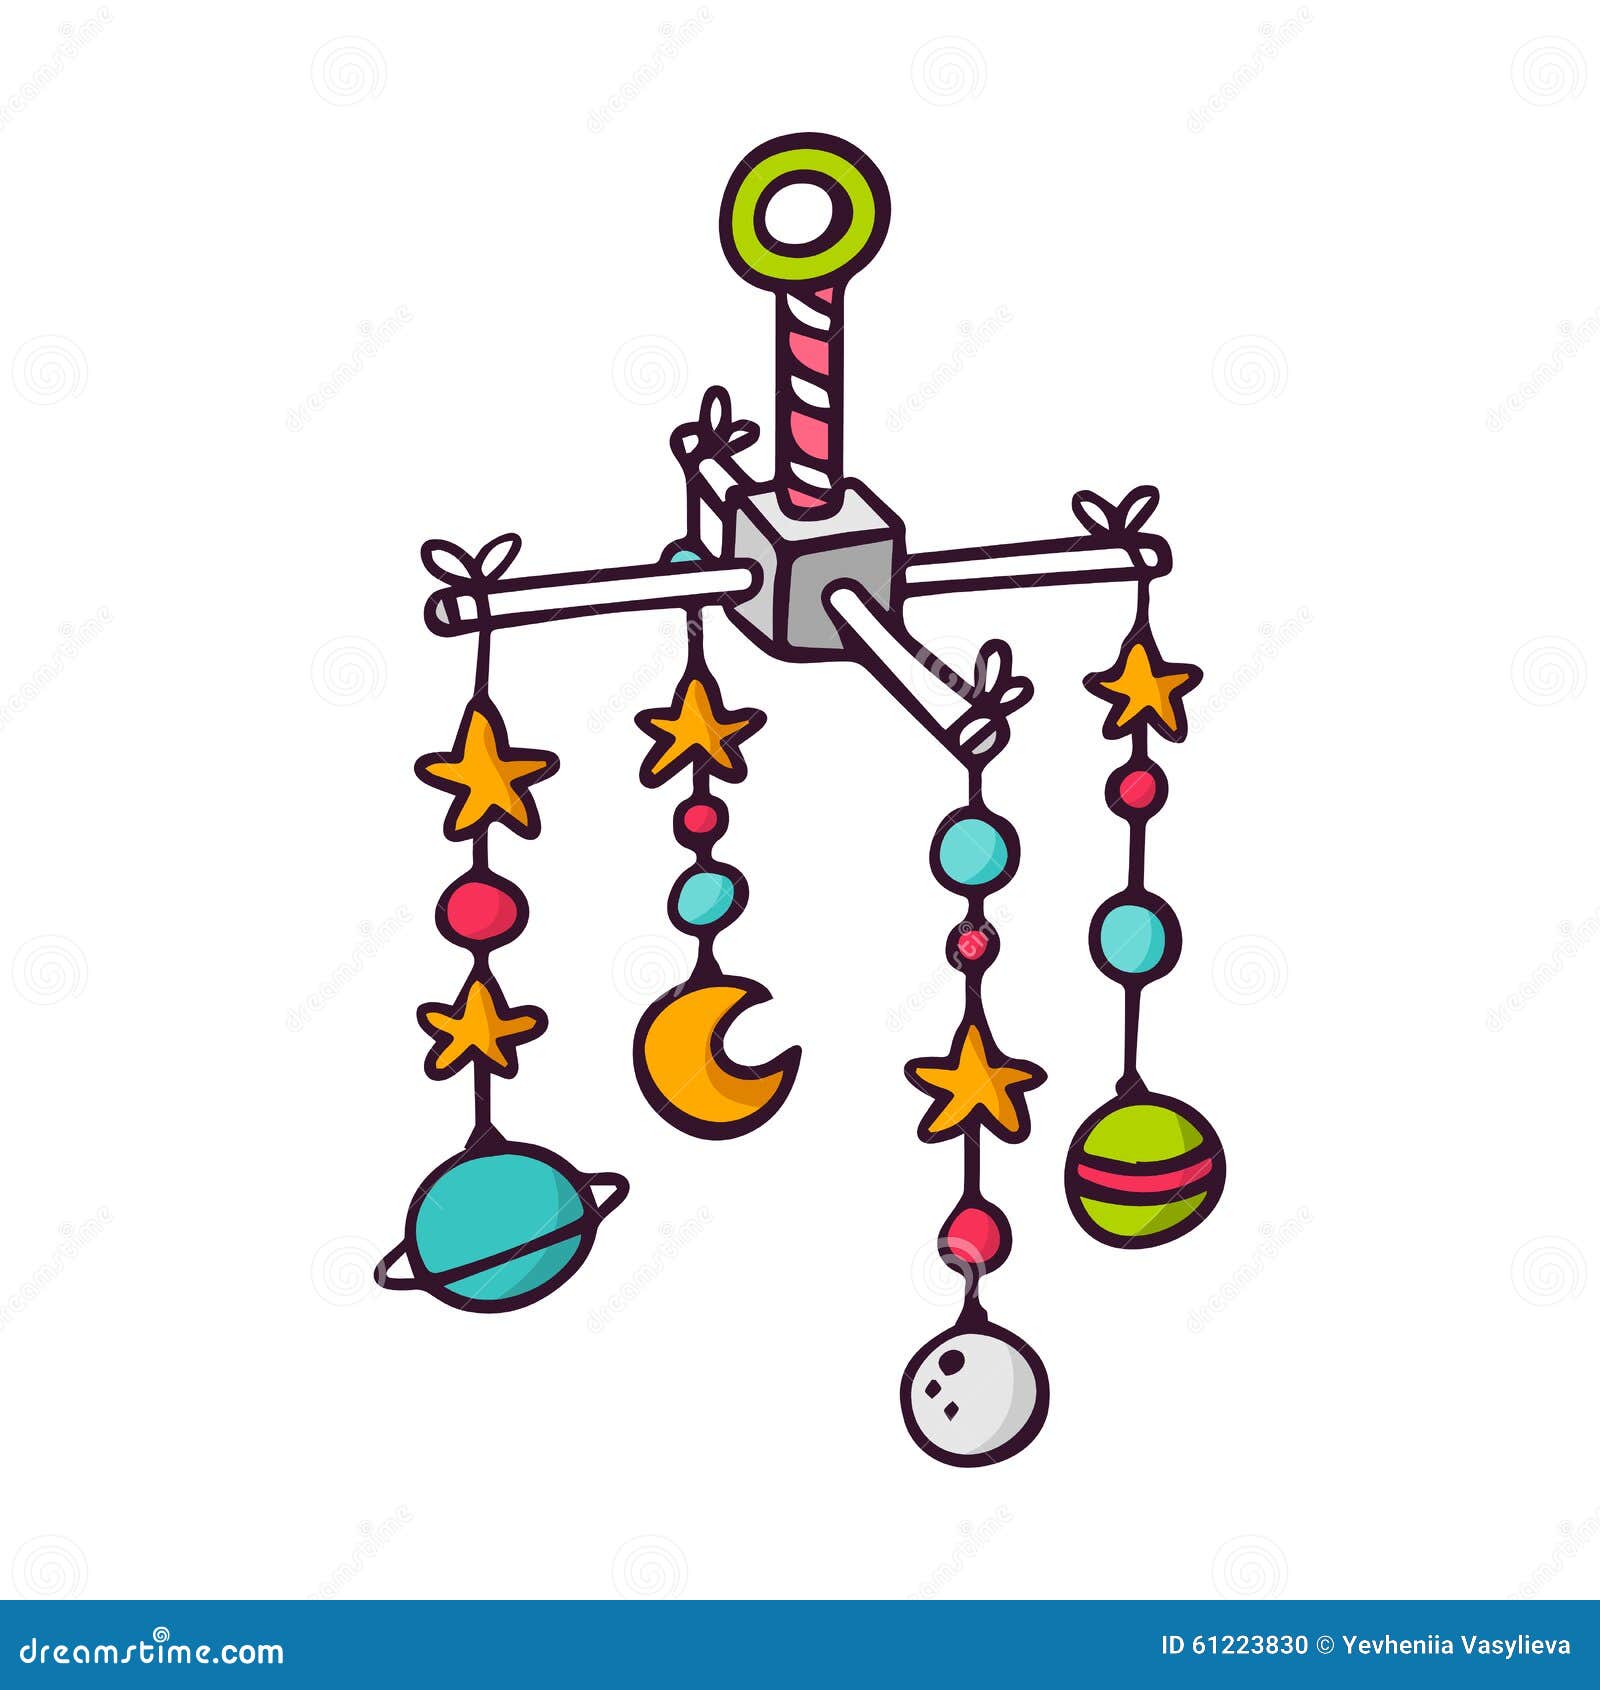 baby mobile clipart - photo #12